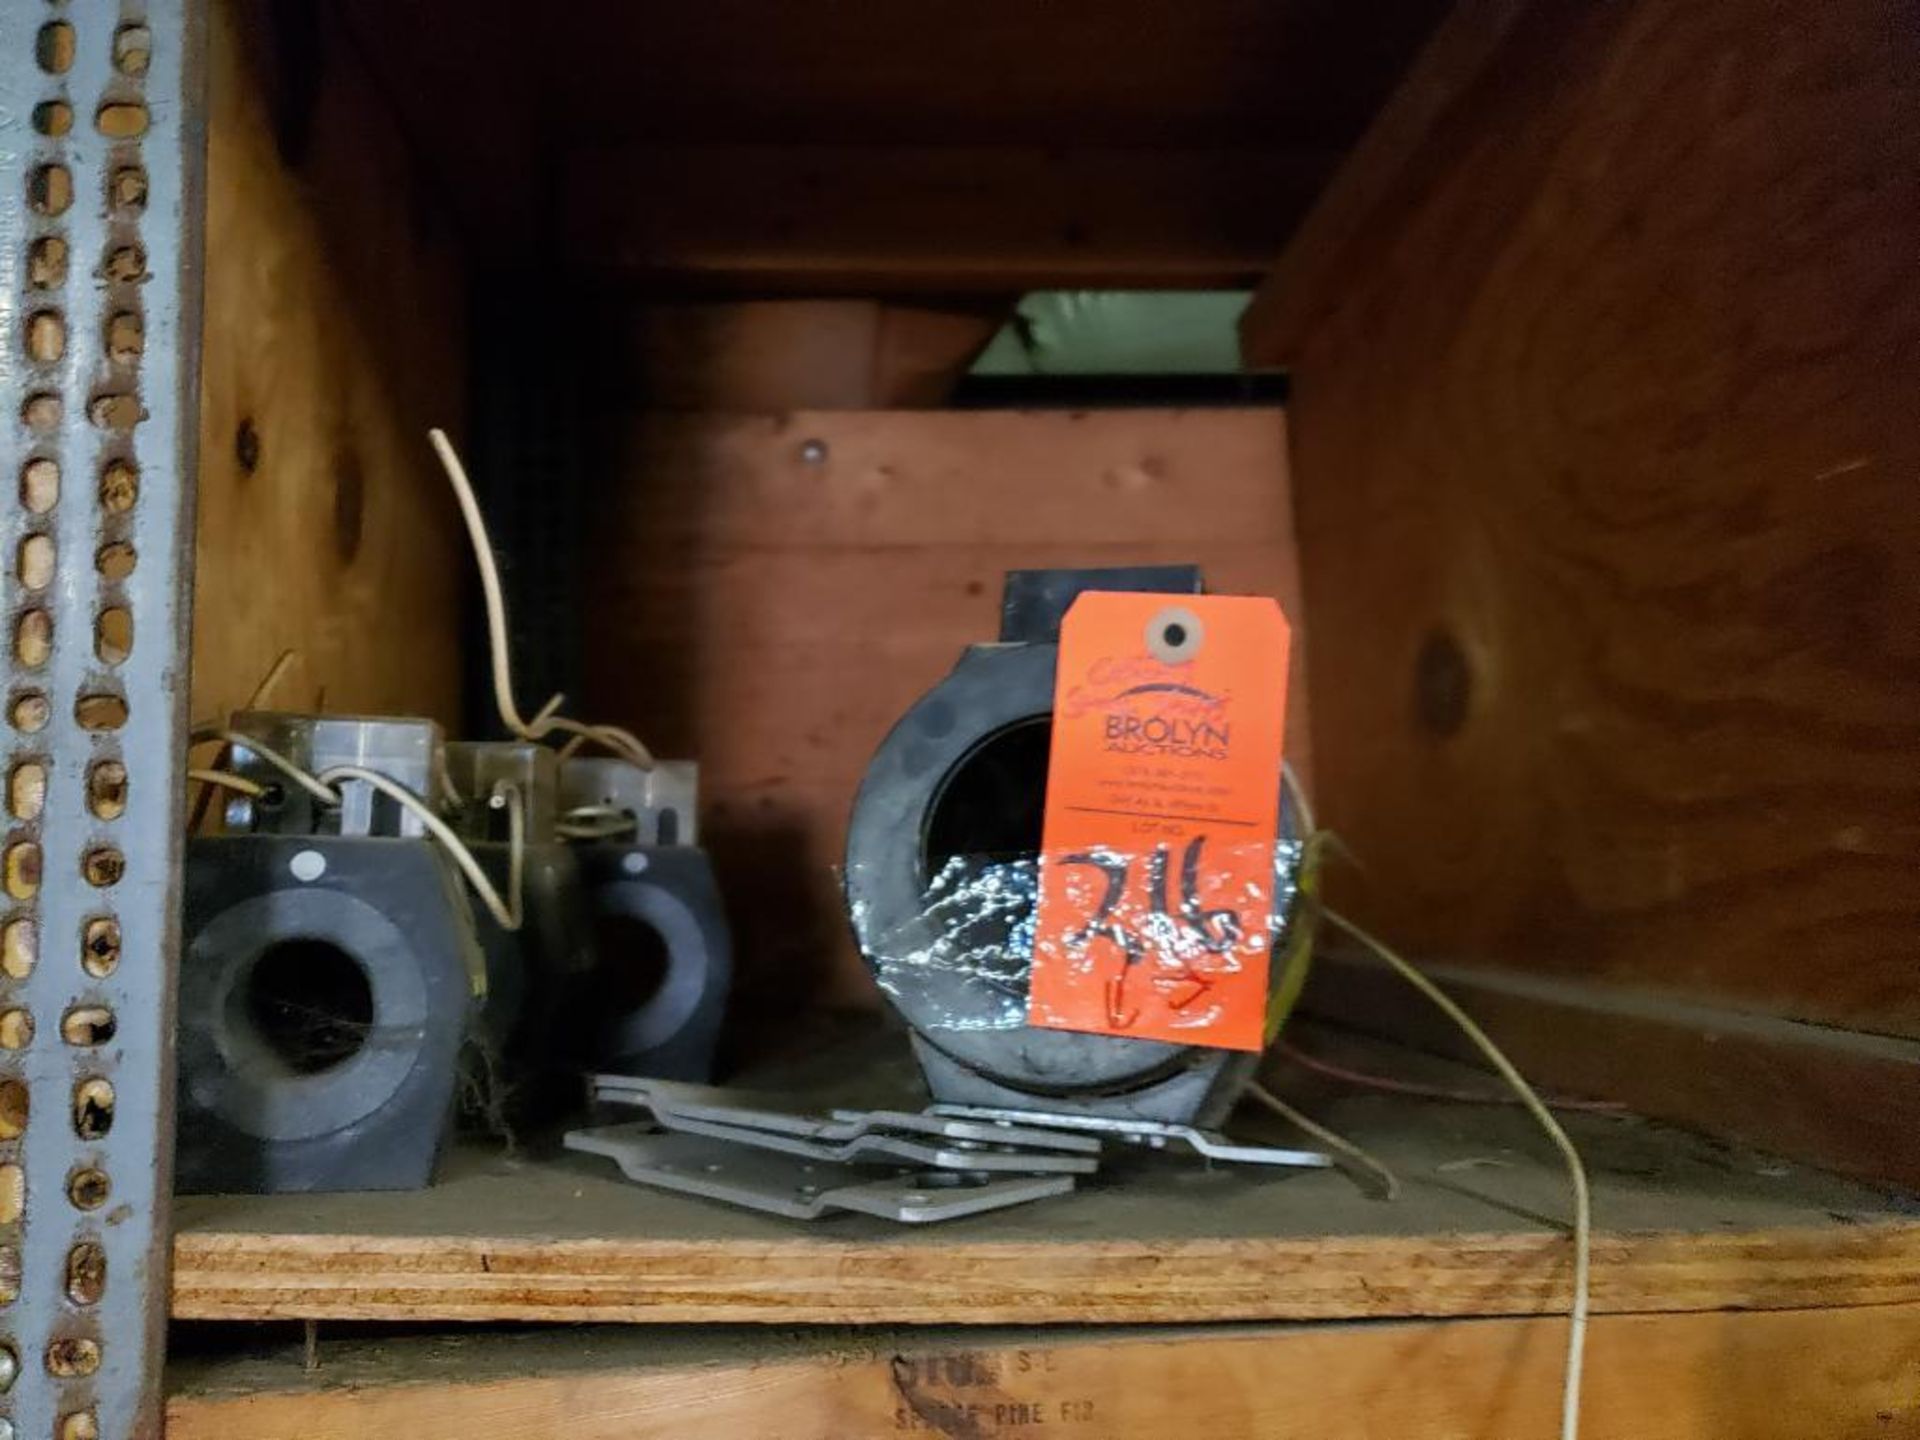 Electrical contents of shelves pictured.